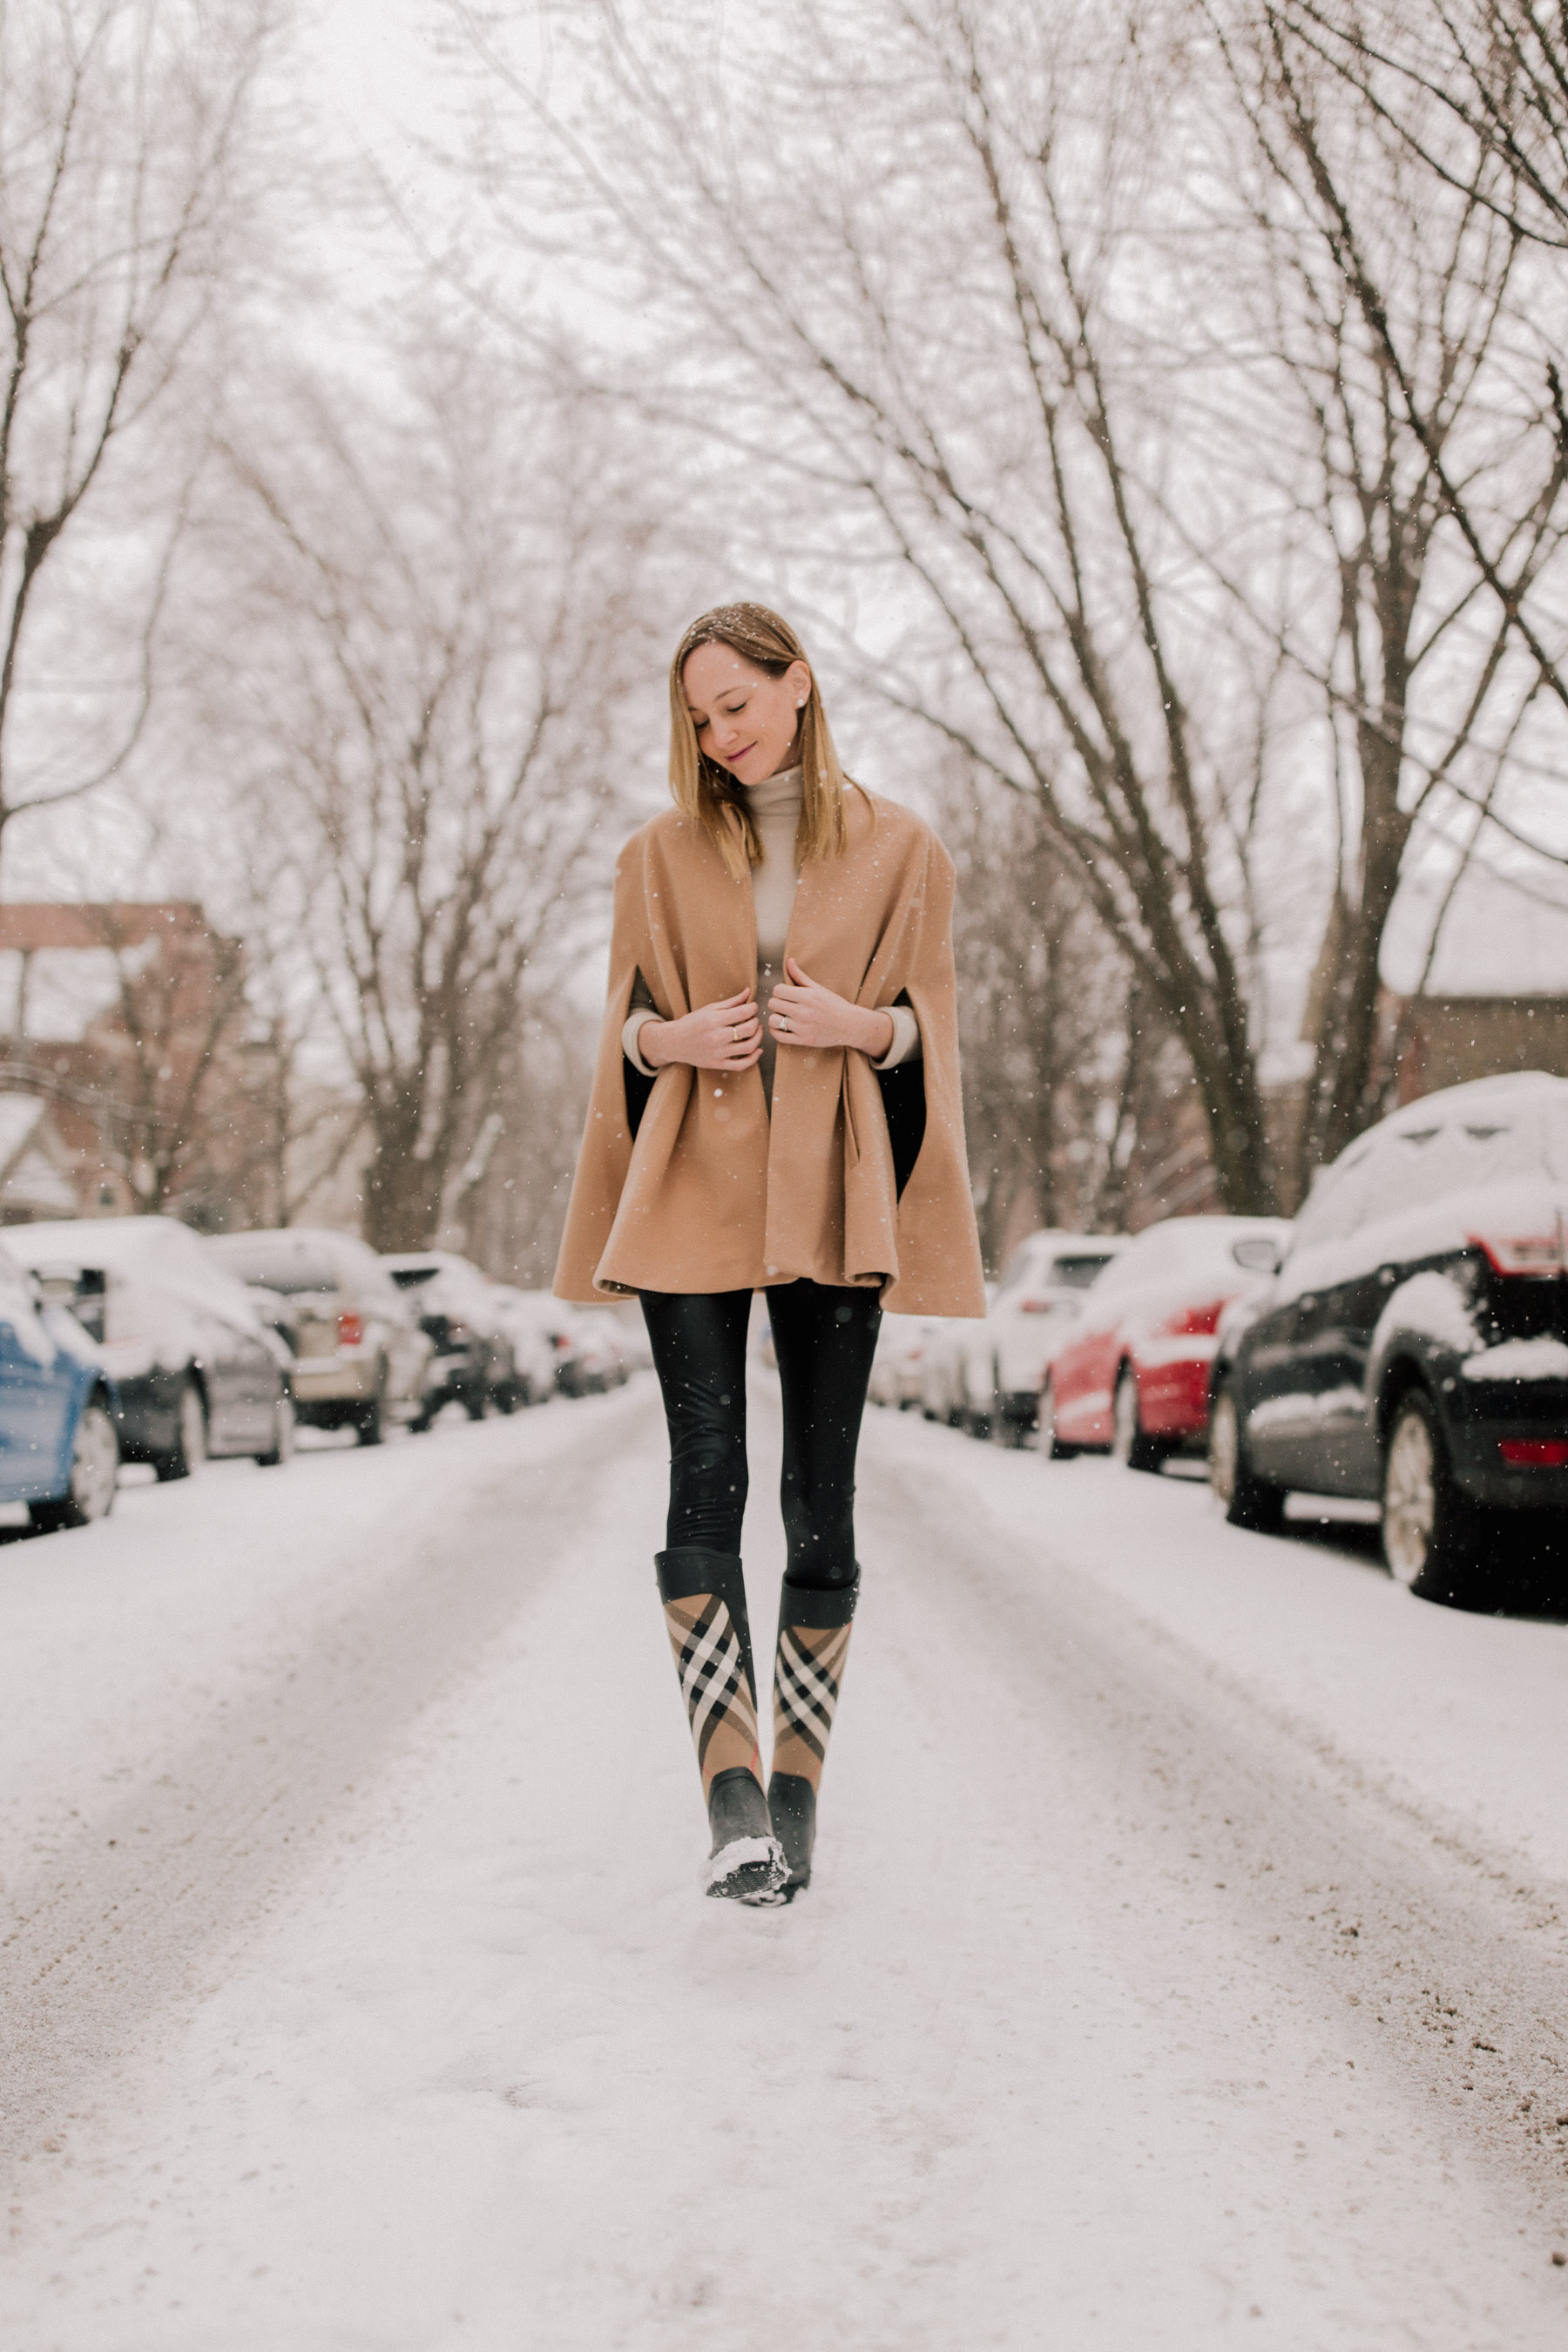 Can You Wear Burberry Rain Boots in the Snow?